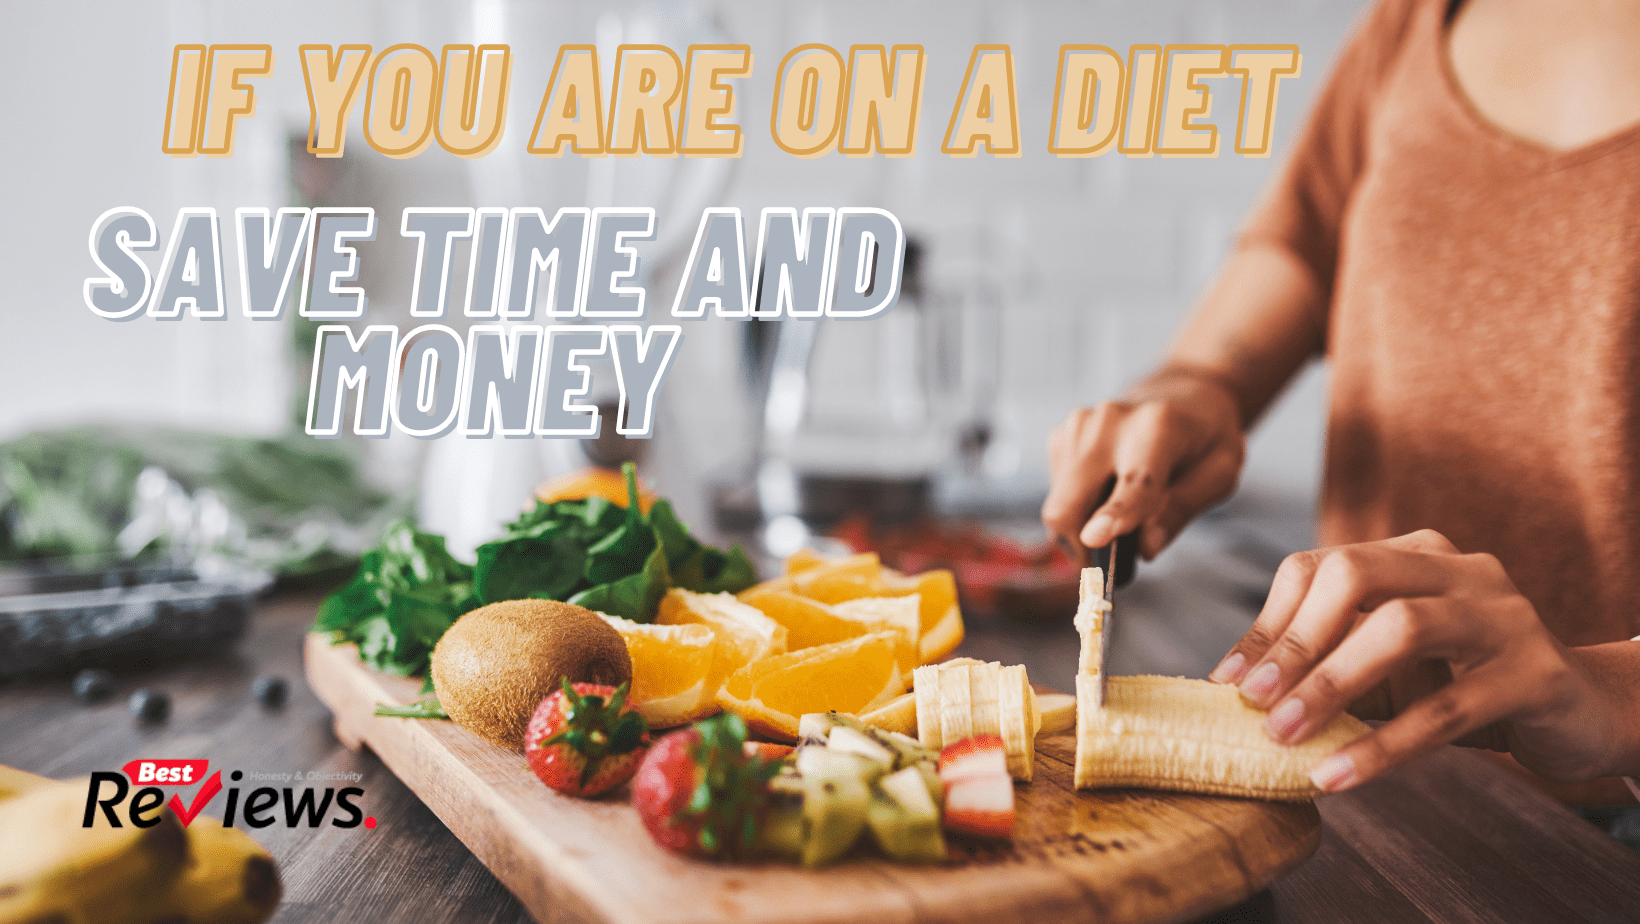 If you are on a diet and want to save time and money